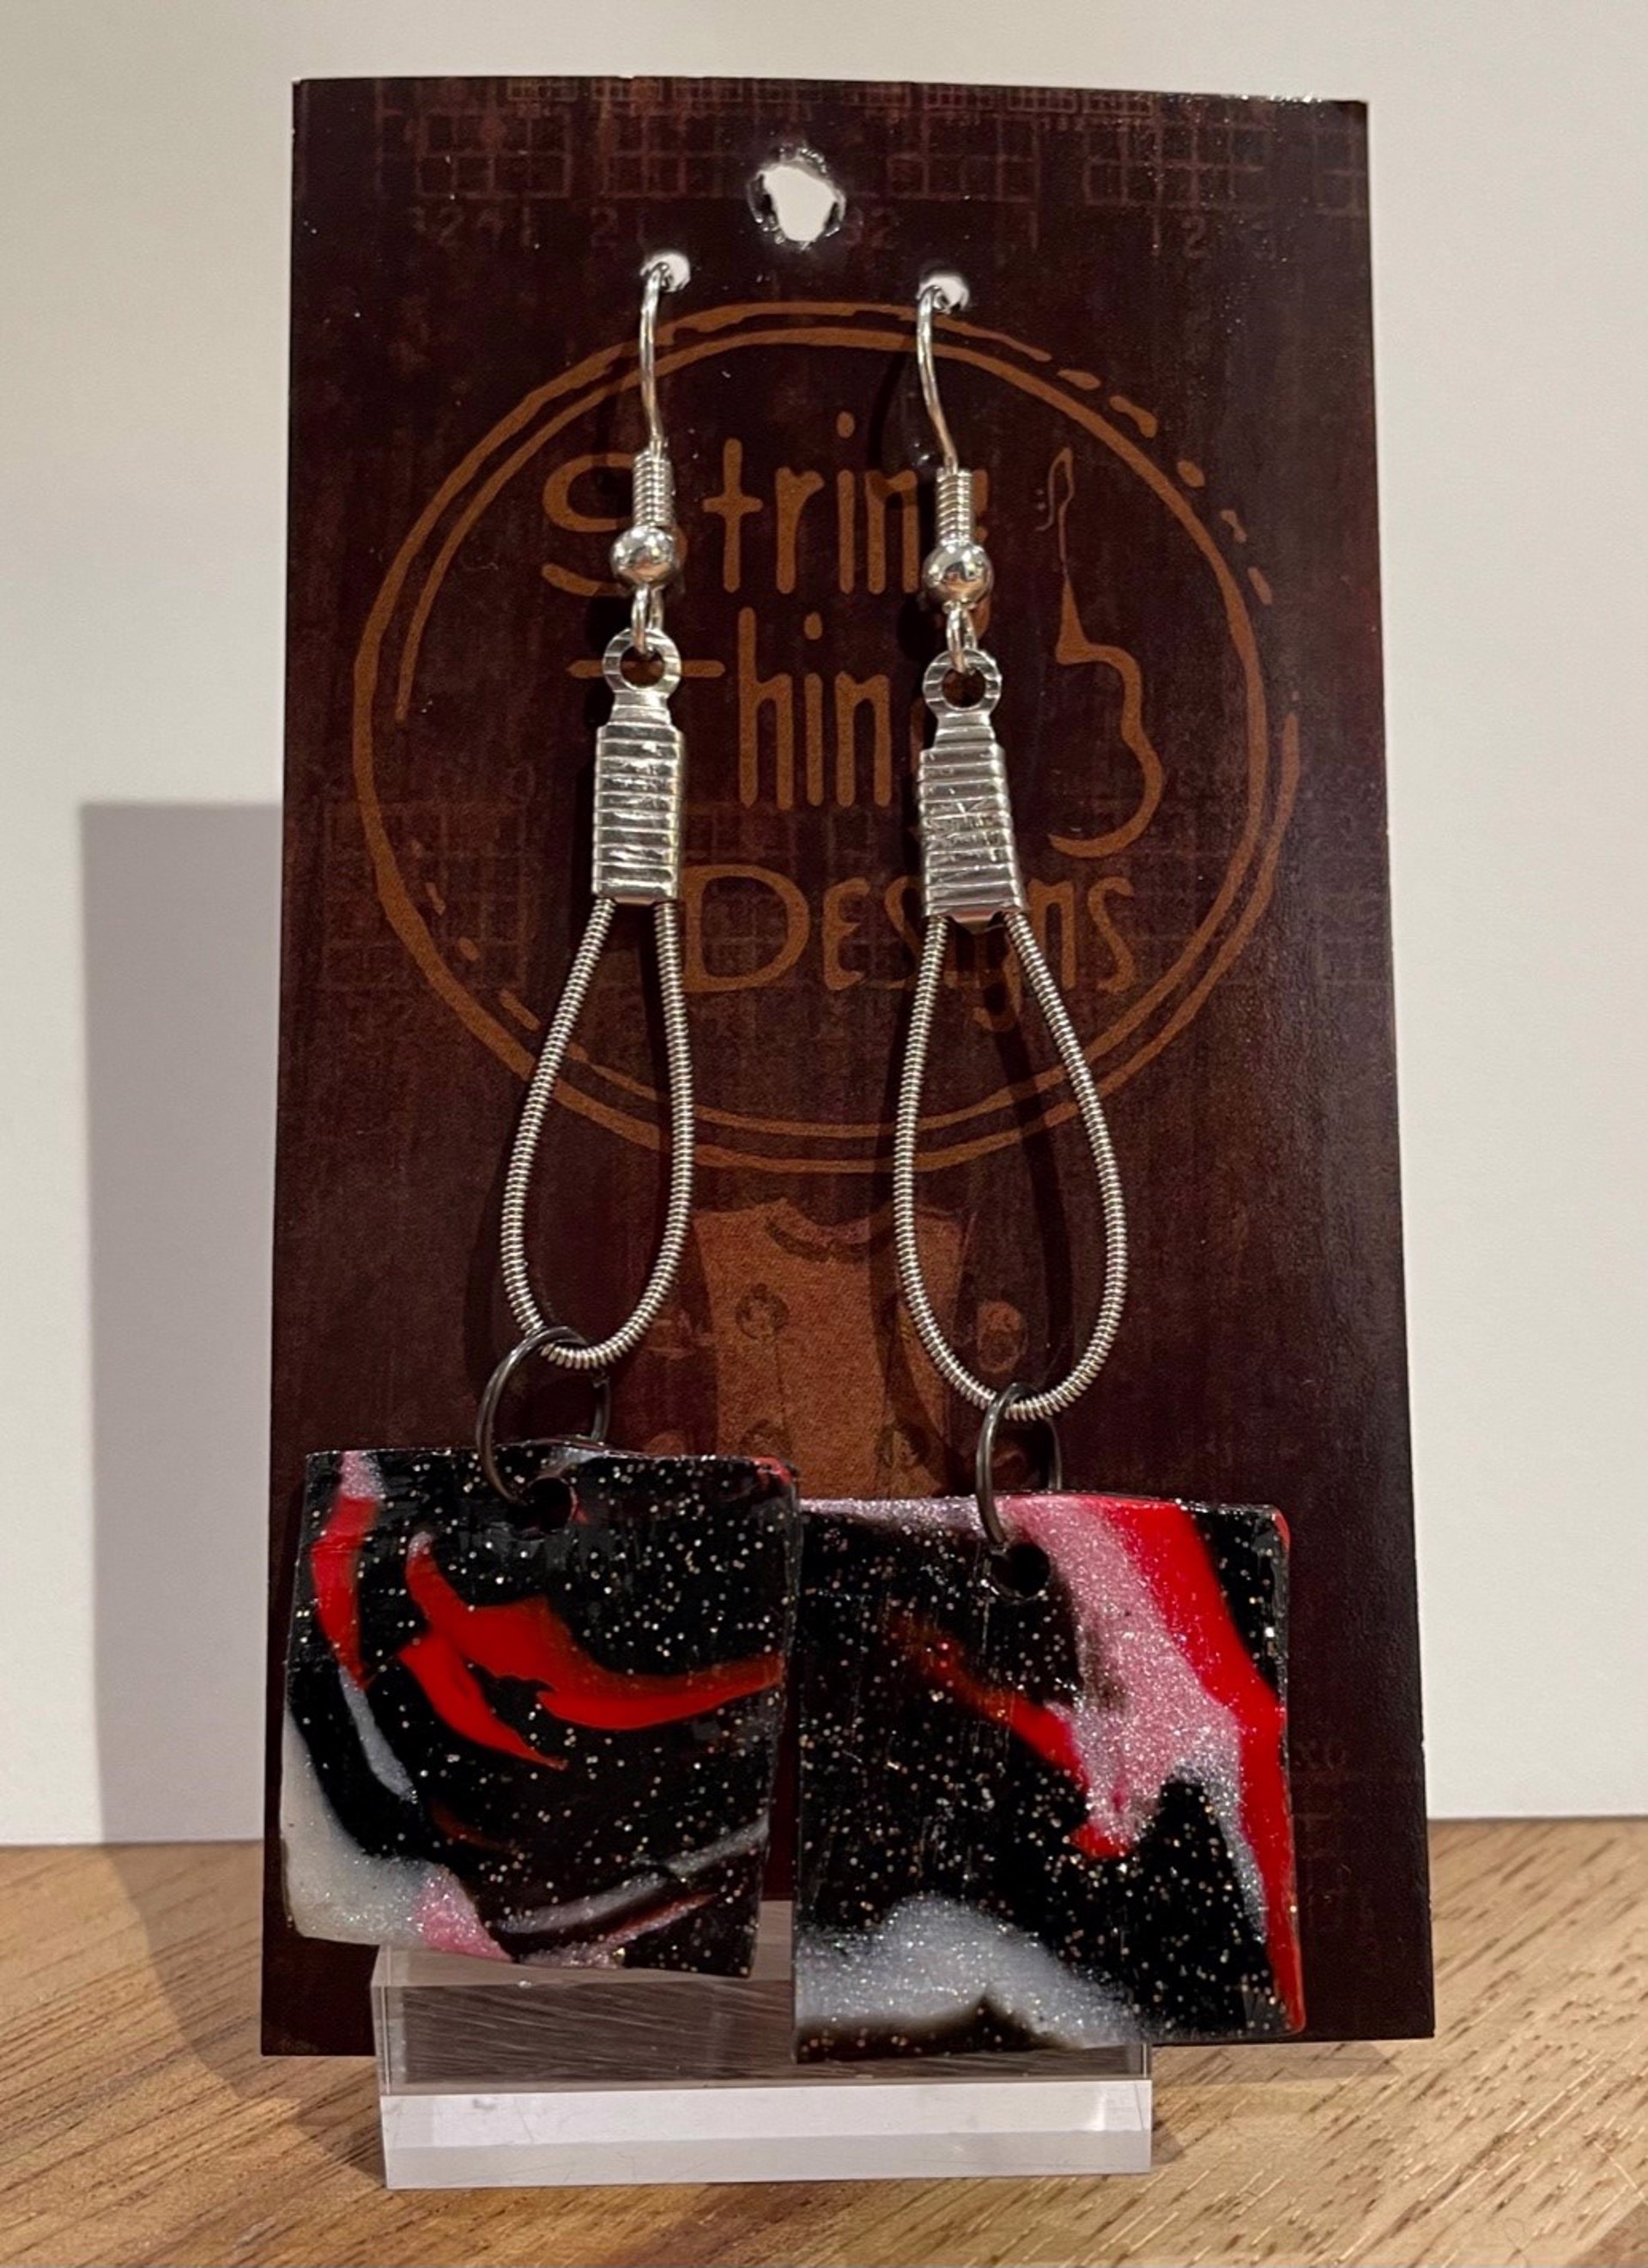 Black Square Guitar String Earrings by String Thing Designs